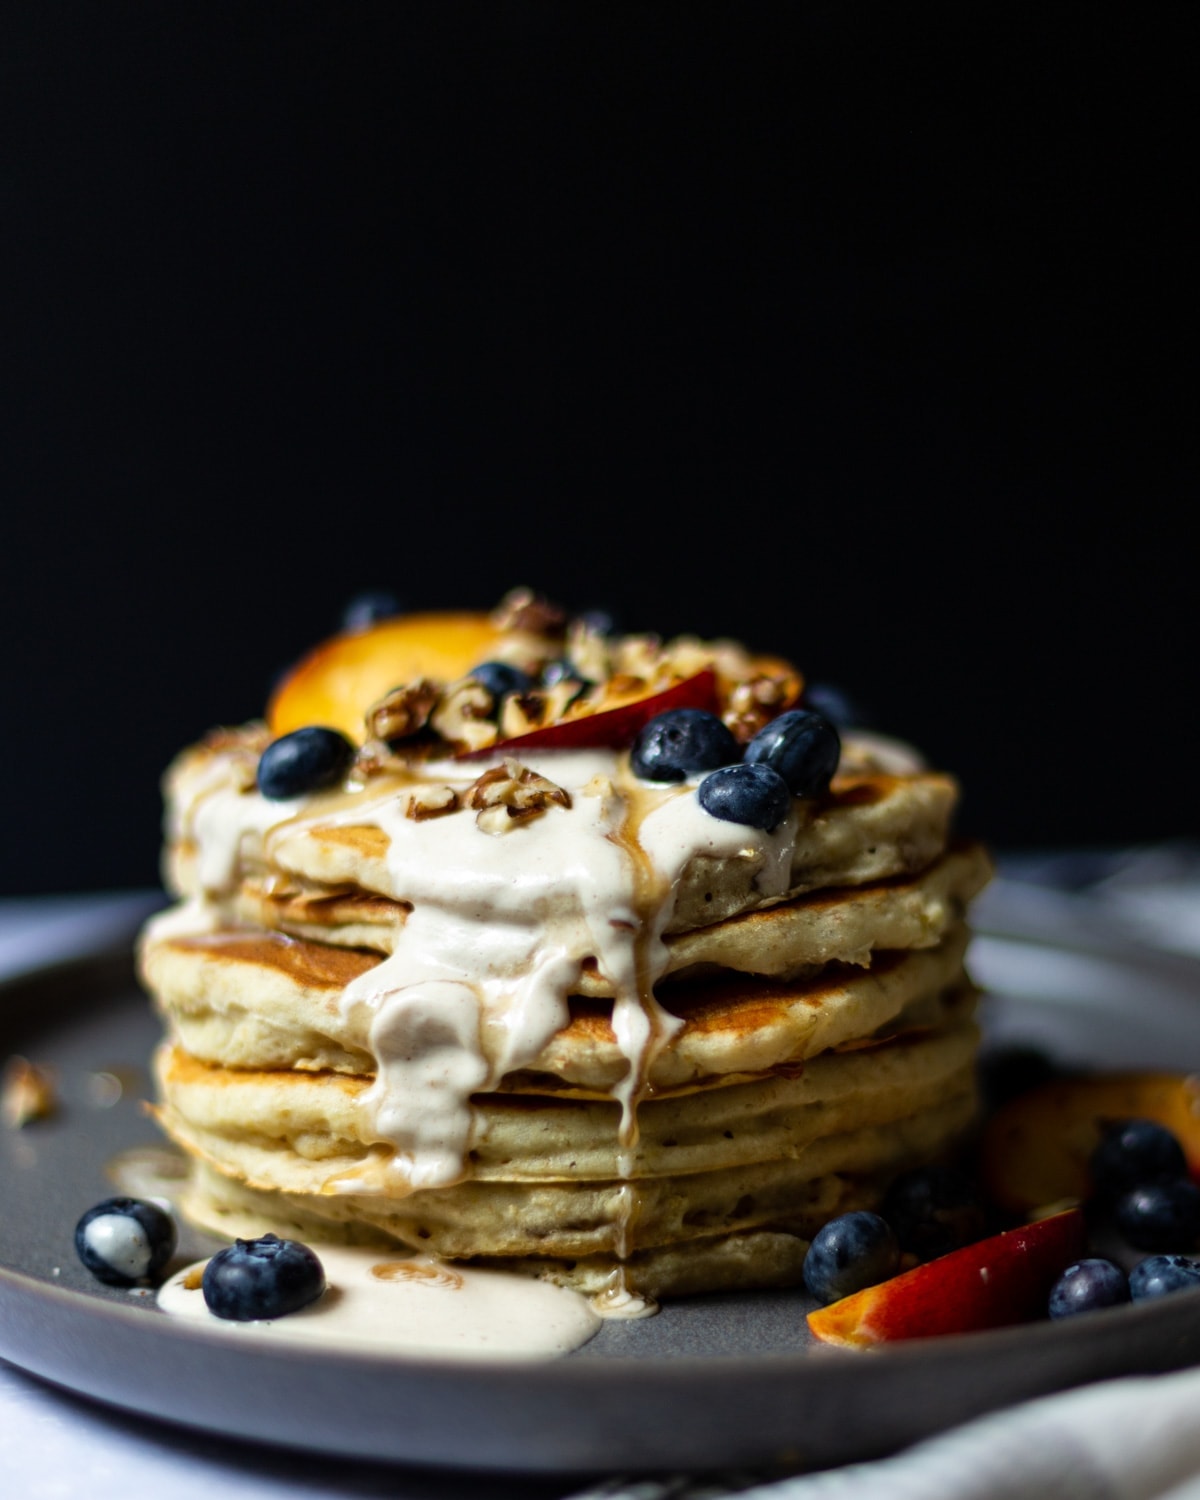 Side view of a stack of pancakes topped with cashew cream, sliced nectarines, blueberries, chopped walnuts and maple syrup.